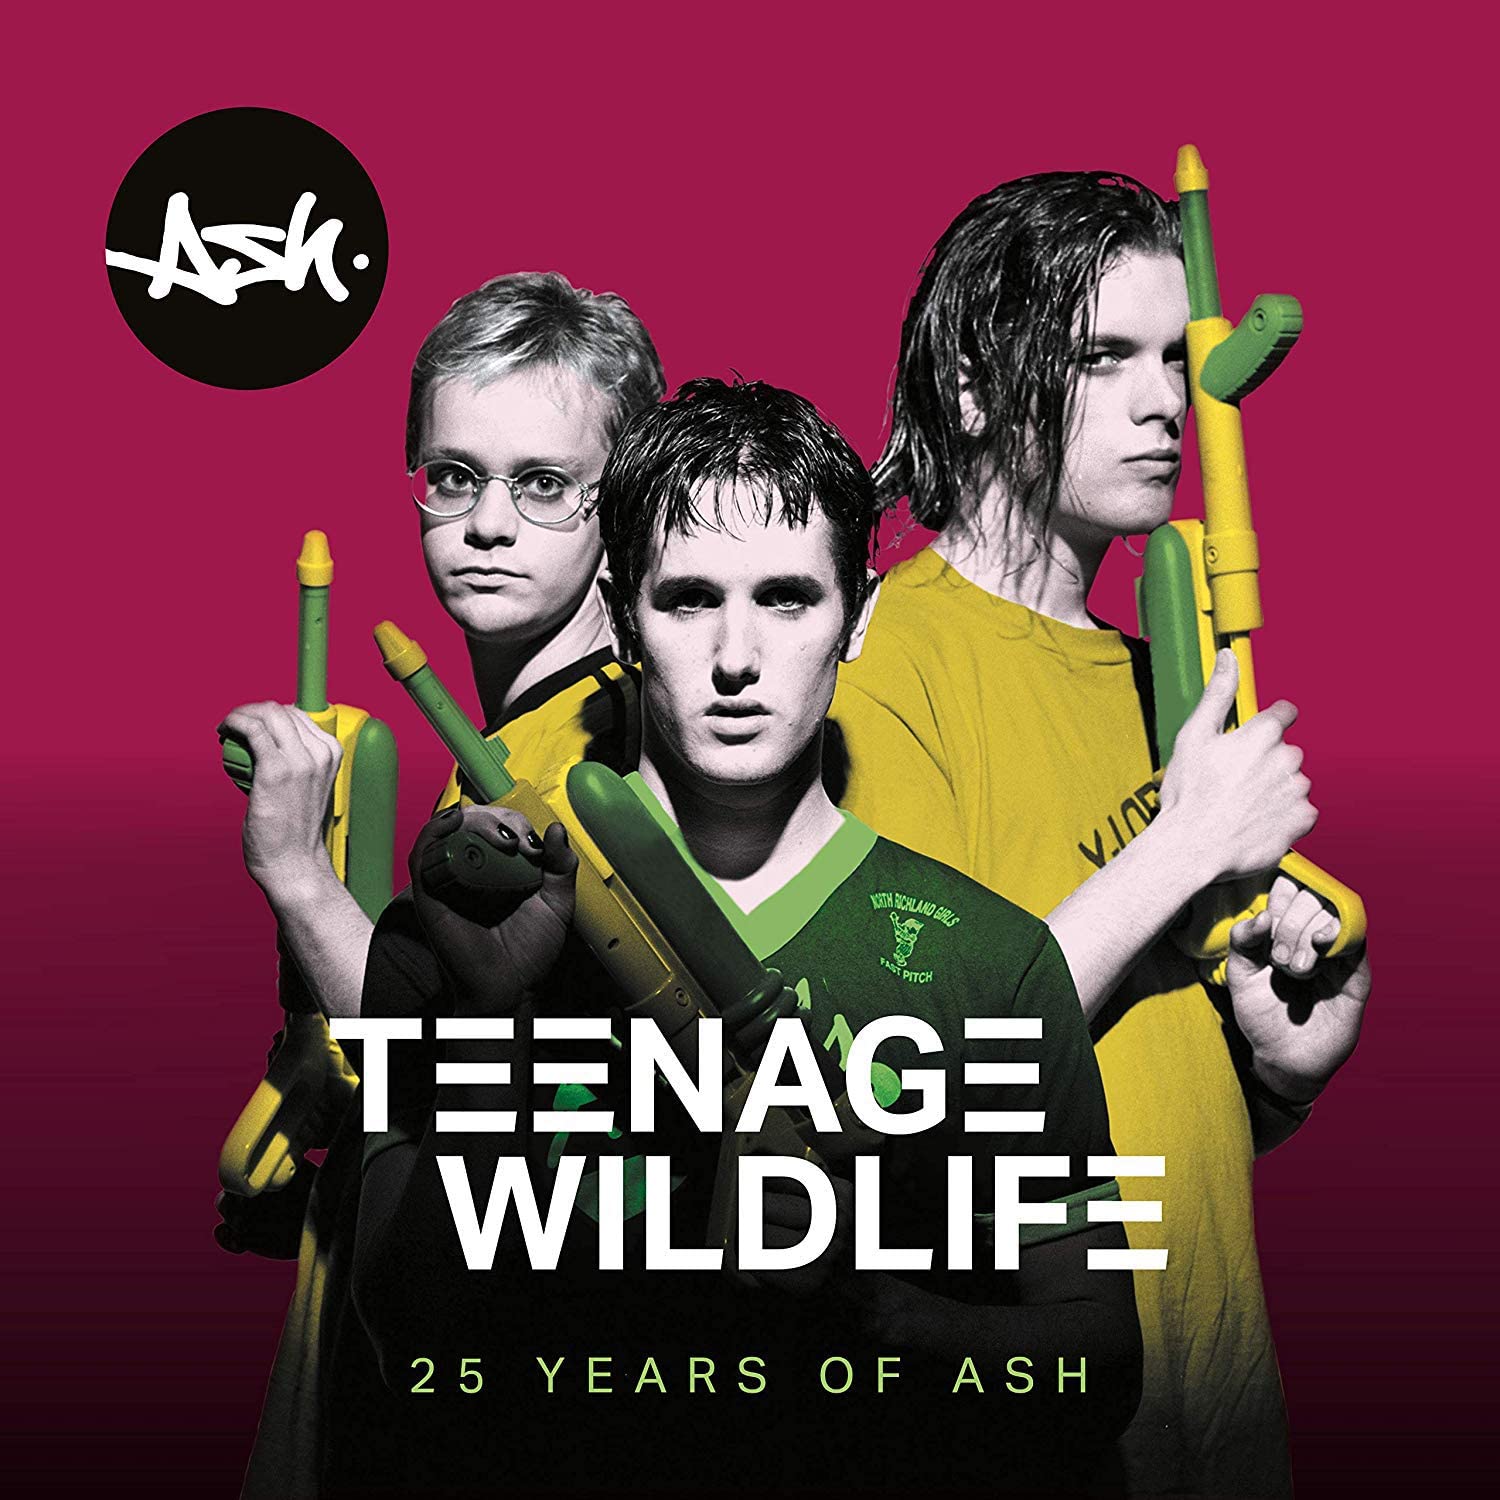 'Teenage Wildlife' traces the career of Ash on Vinyl from exuberant debut, 'Trailer' in 1994 to 'Islands', the band's most recent offering. 